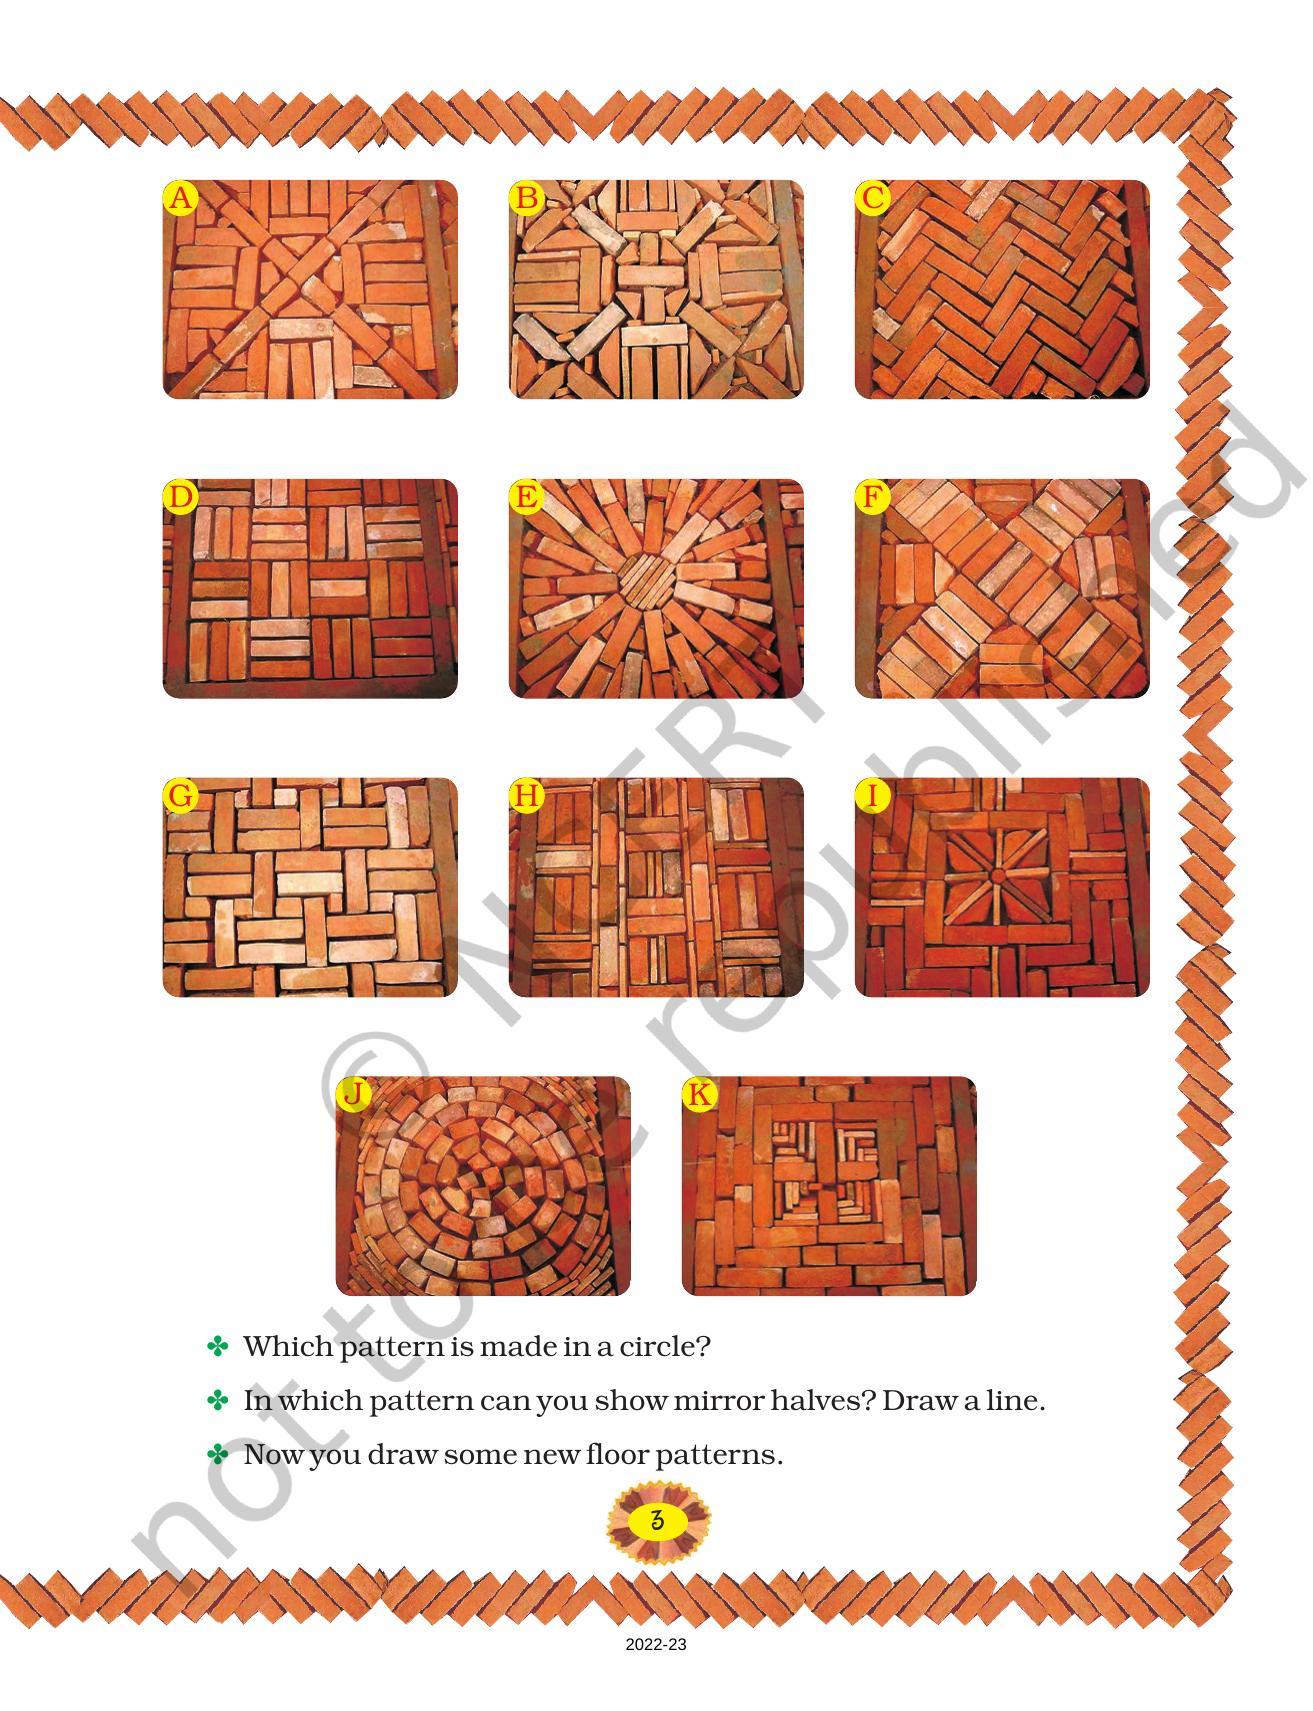 NCERT Book for Class 4 Maths Chapter 1 Building with Bricks - Page 3